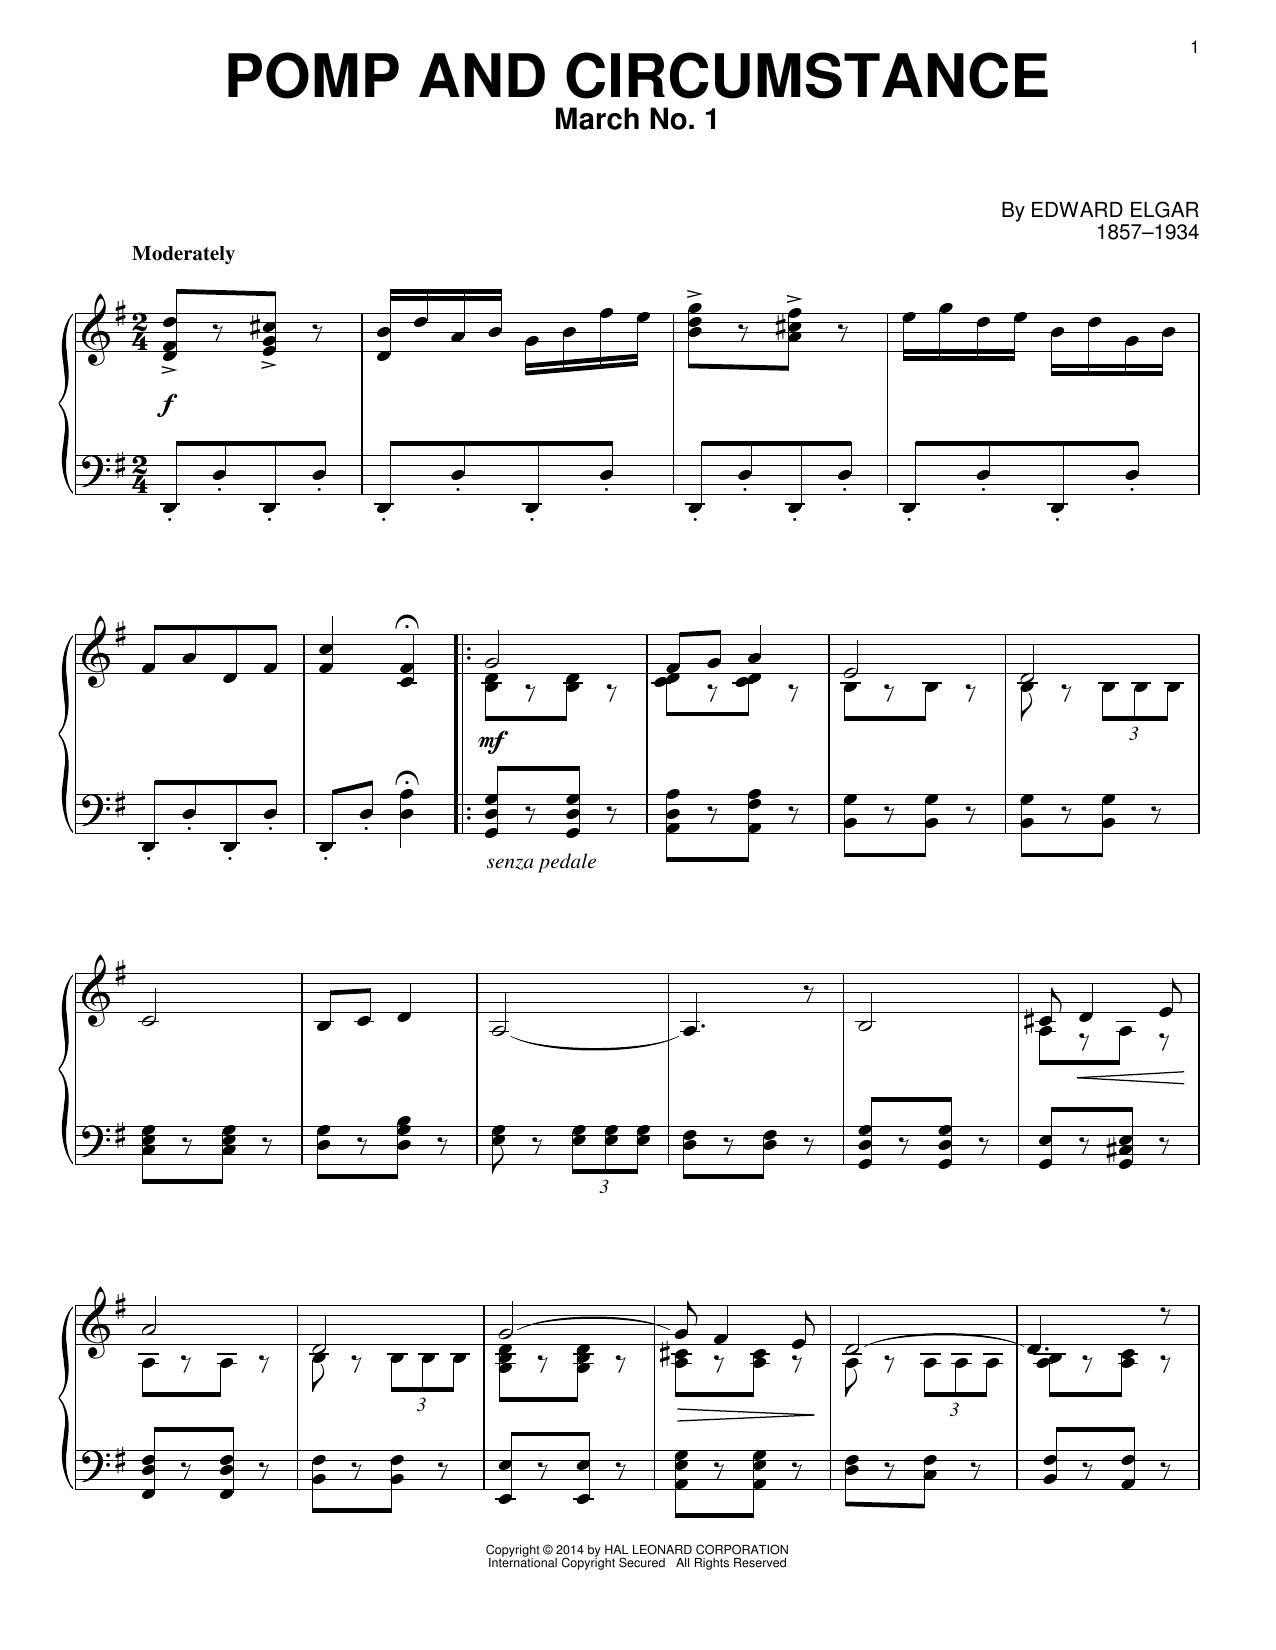 Edward Elgar &amp;quot;pomp And Circumstance, March No. 1&amp;quot; Sheet Music Notes - Free Printable Sheet Music Pomp And Circumstance